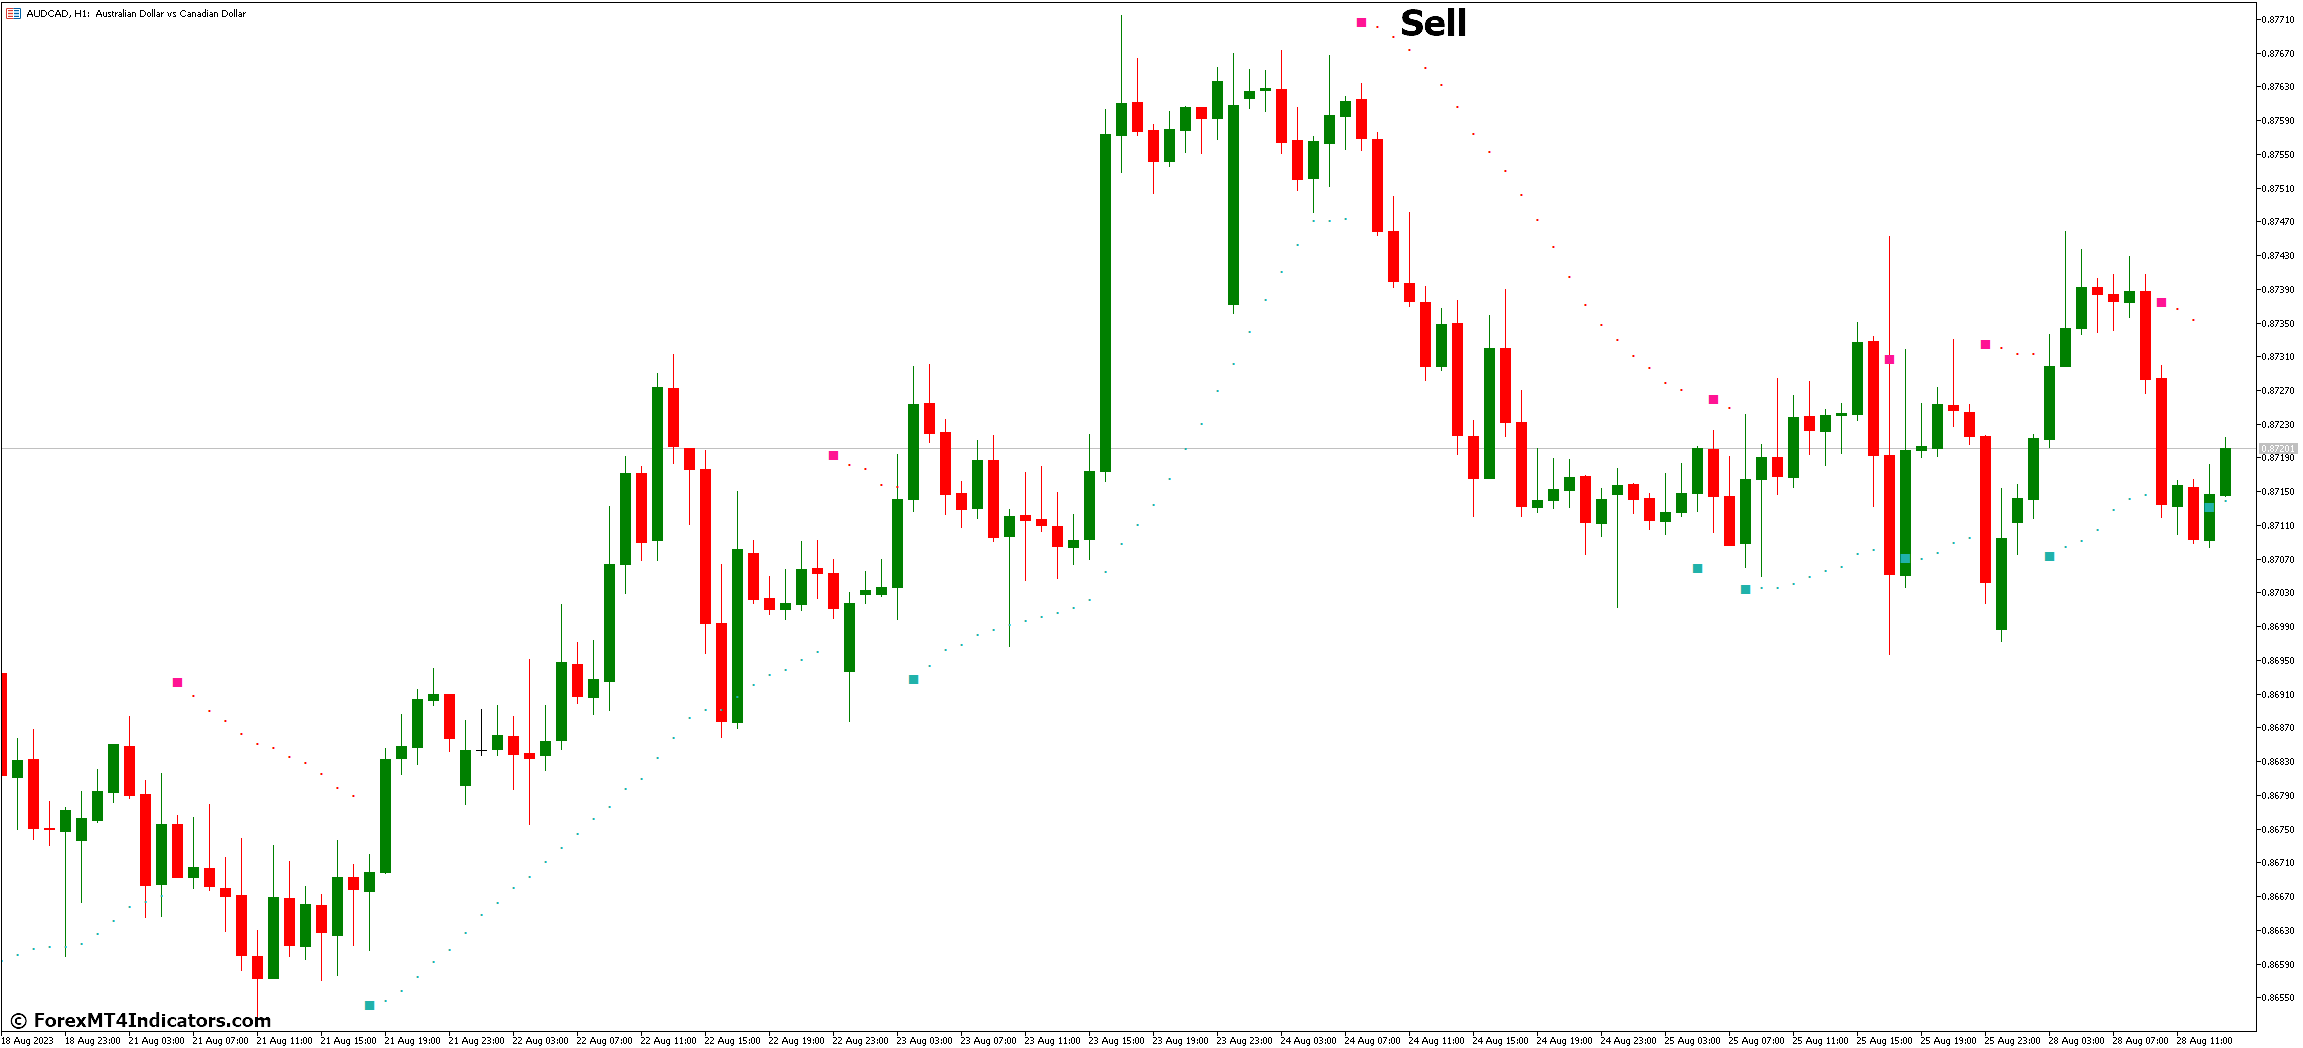 How to Trade with Buy Sell MT5 Indicator - Sell Entry